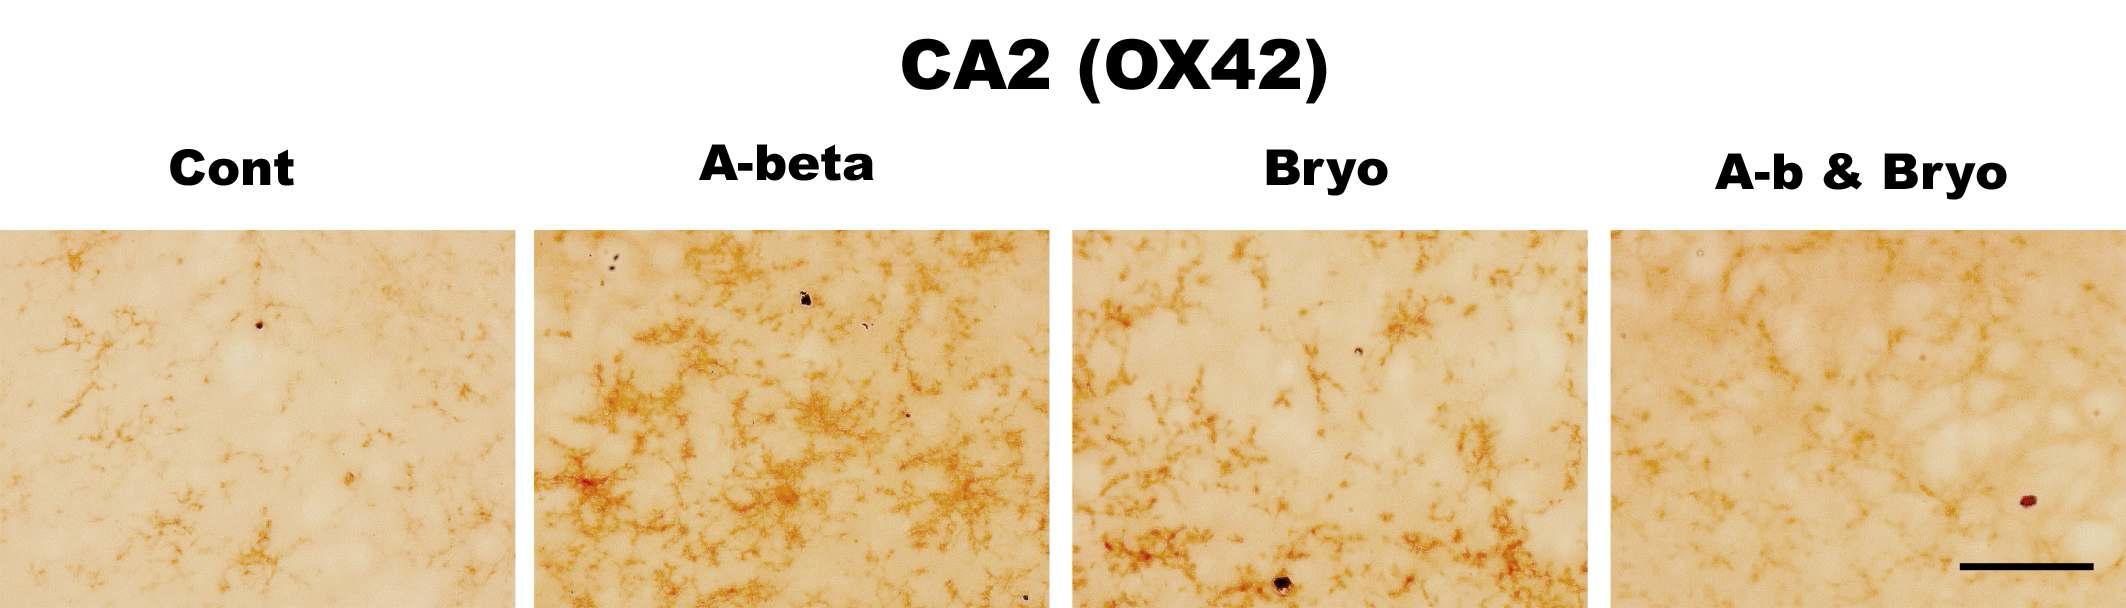 Effects of Bryostatin-1 on glial cell activation in CA2 hippocampus in rat. Bryostatin-1 significantly suppresses a microglia activation in CA2 of rat infused with amyloid beta. Intracerebro-ventricular infusion of Aβ and Bryostatin-1 was for four weeks using a micro-osmotic pump. Immuno- histochemistry (anti-CD11b) (scale bar, 50μm)(40Χ magnification)